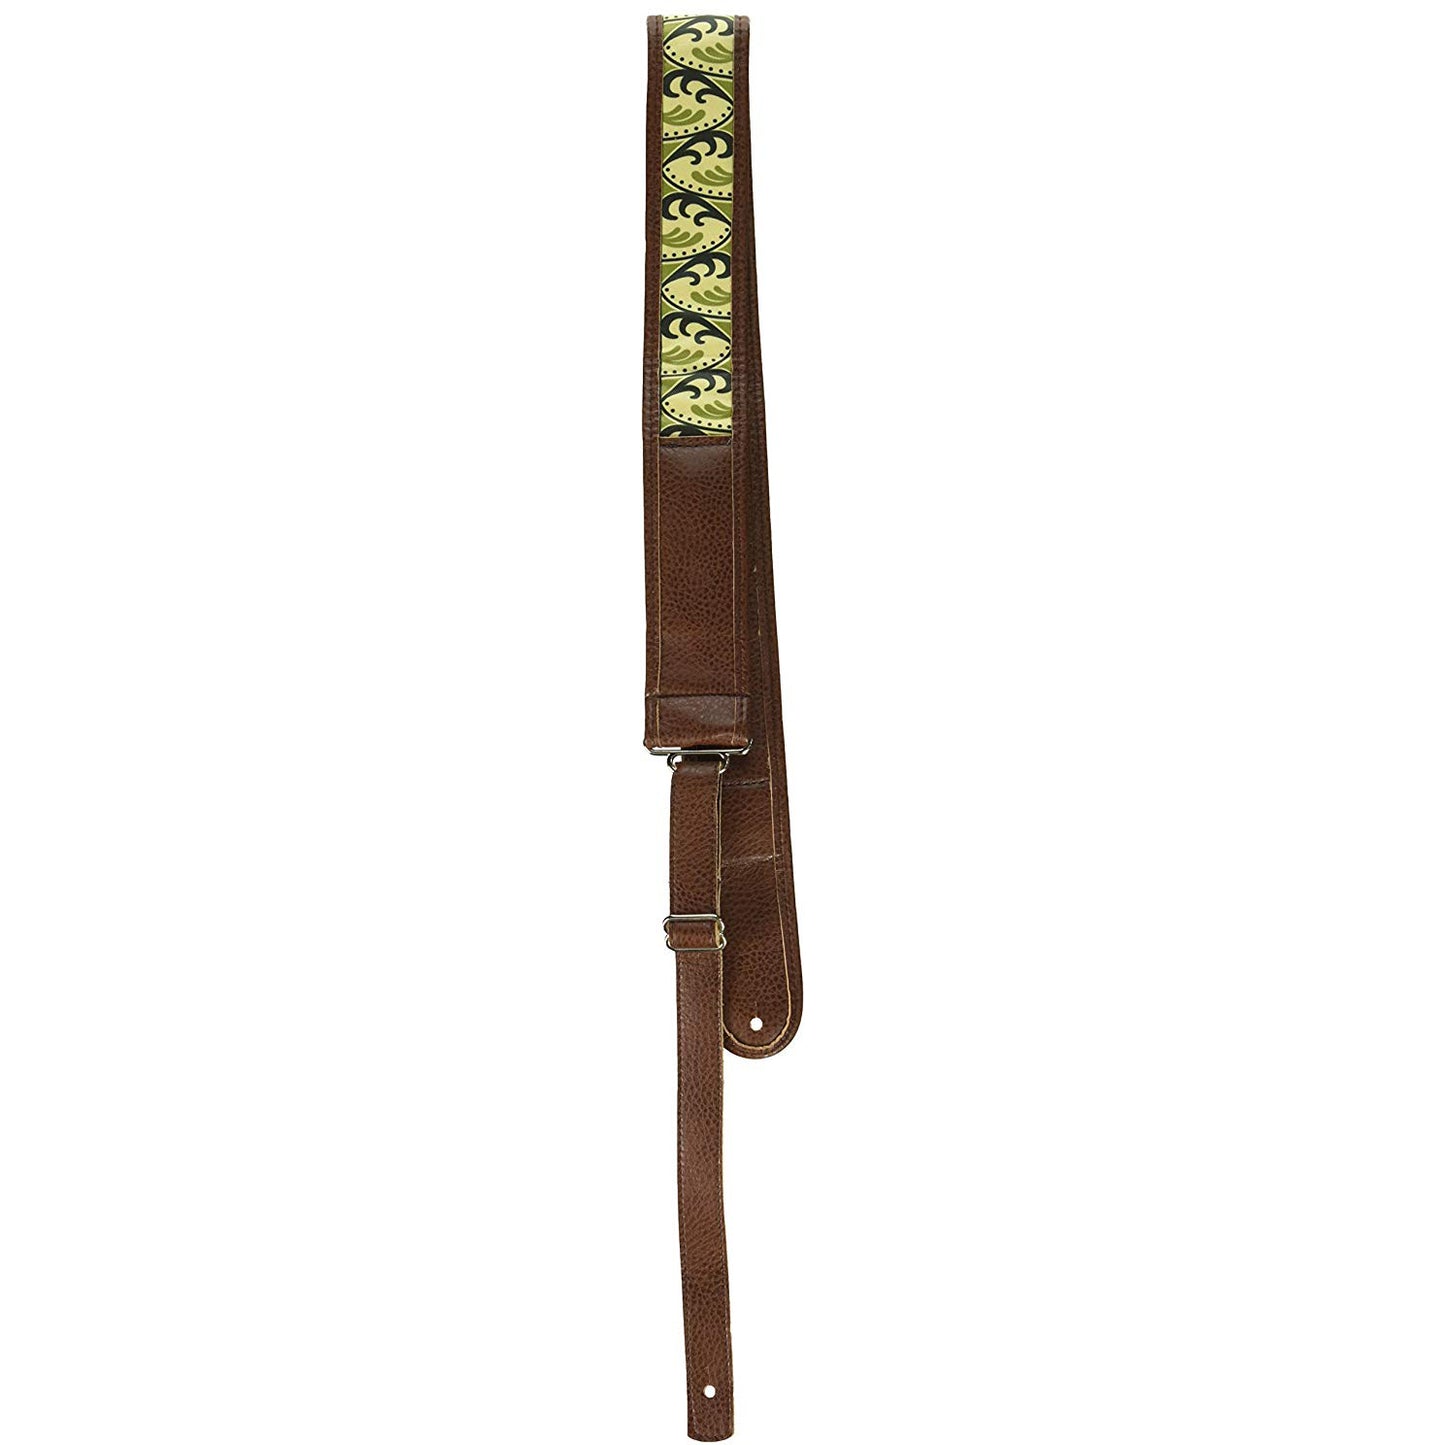 Kyser Leather Strap with Built-In Capo Holder - Spring K Brown